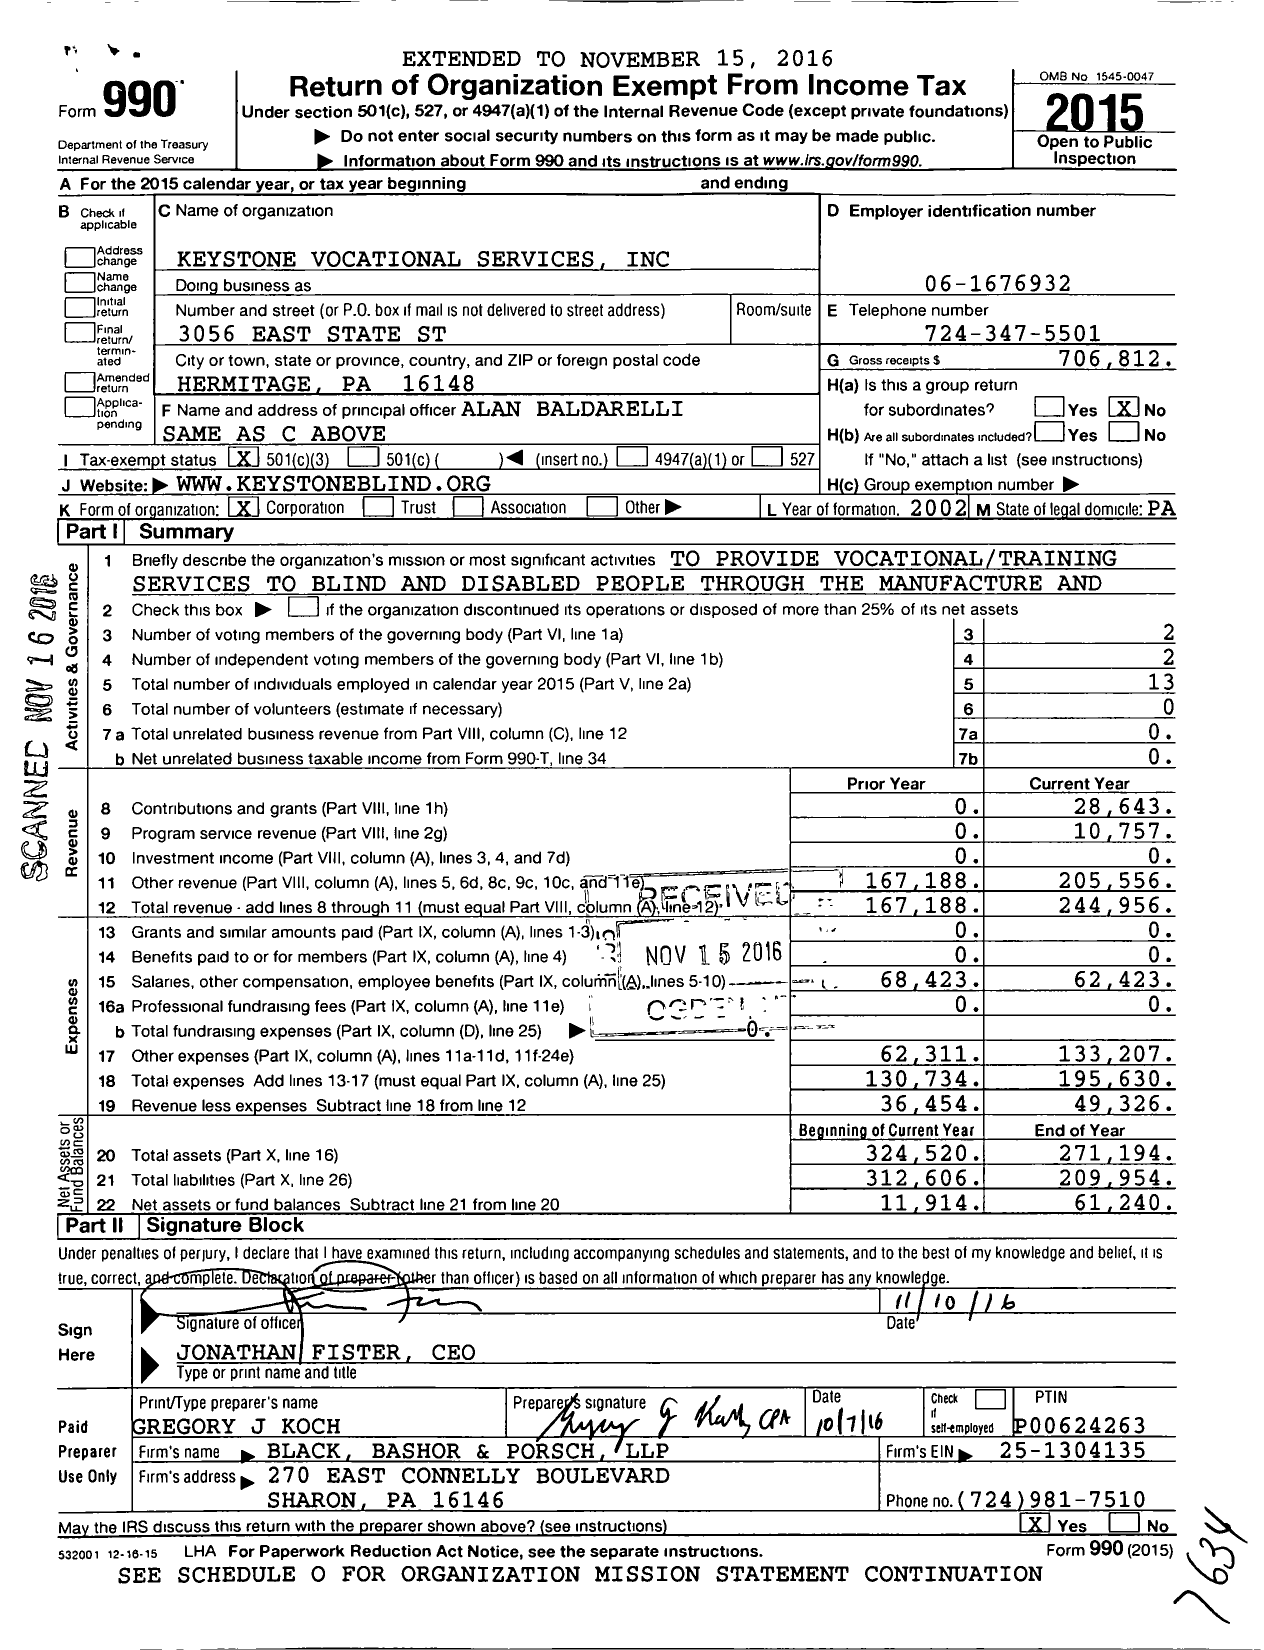 Image of first page of 2015 Form 990 for Keystone Vocational Services